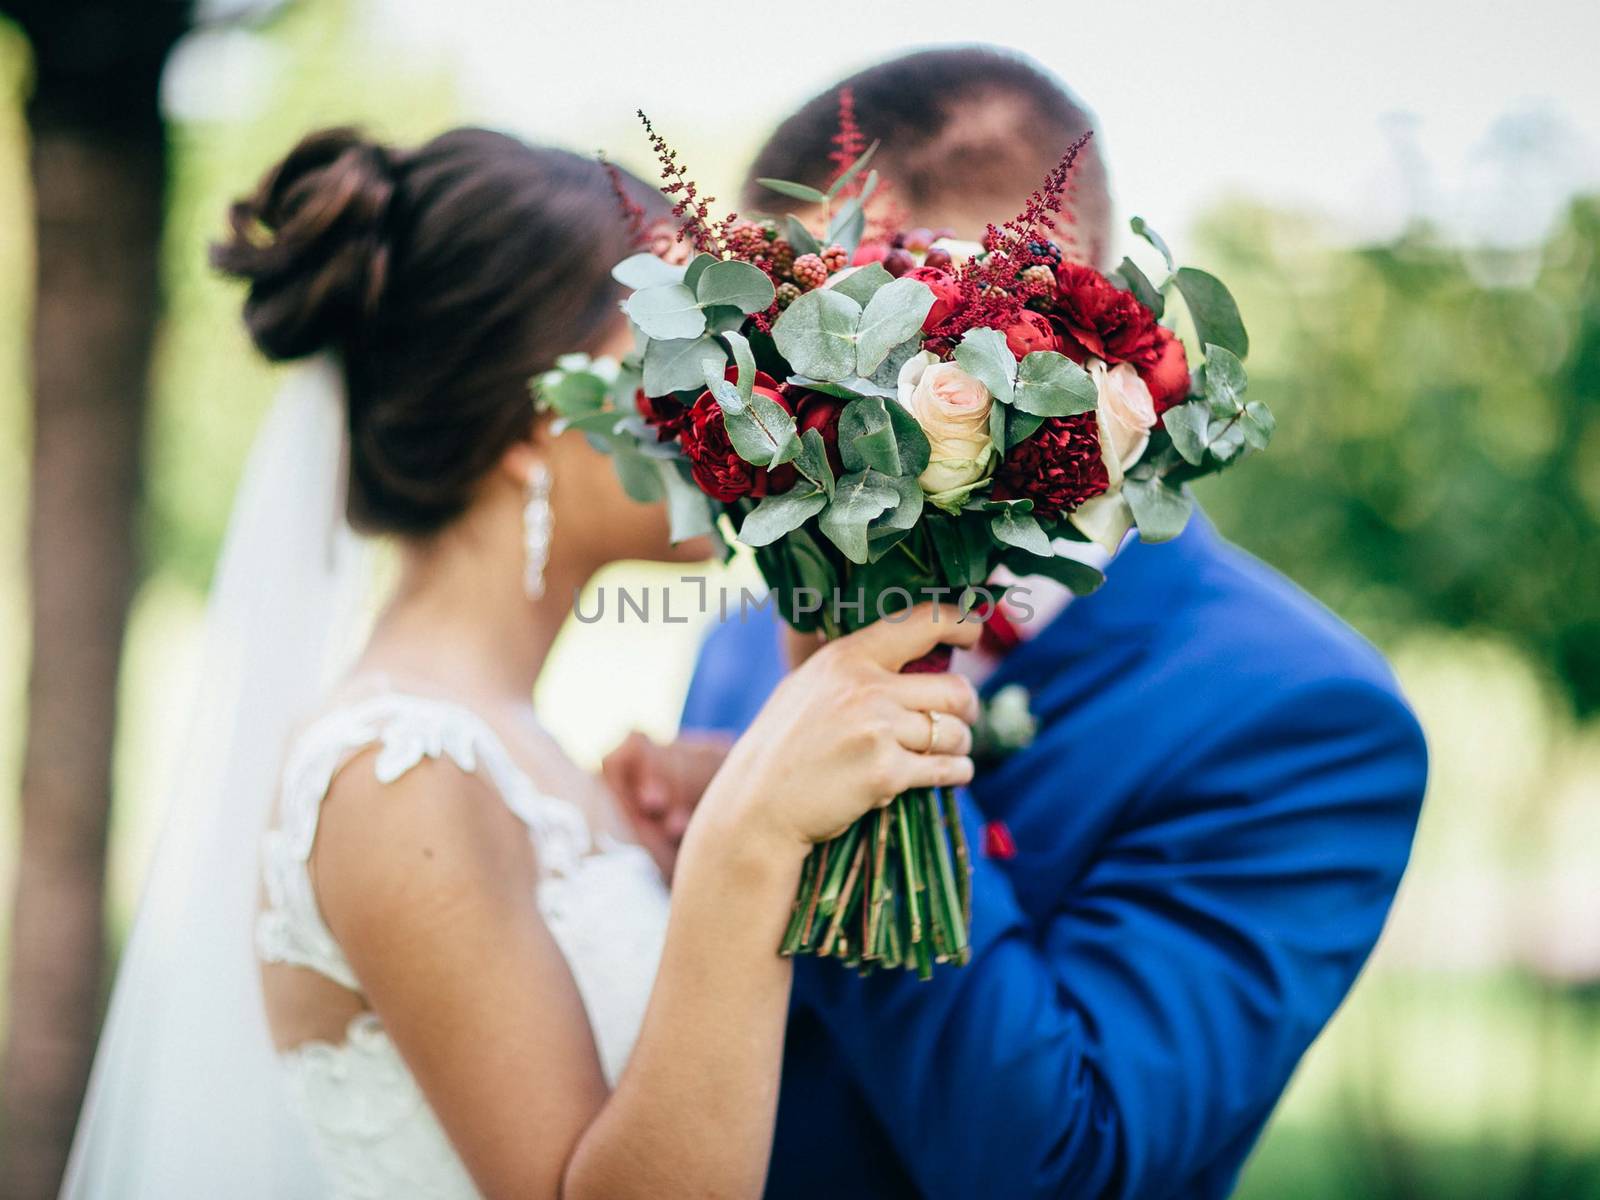 Bridal bouquet on the background of the groom with the bride. Bridal bouquet. Girl covers her face with a bouquet